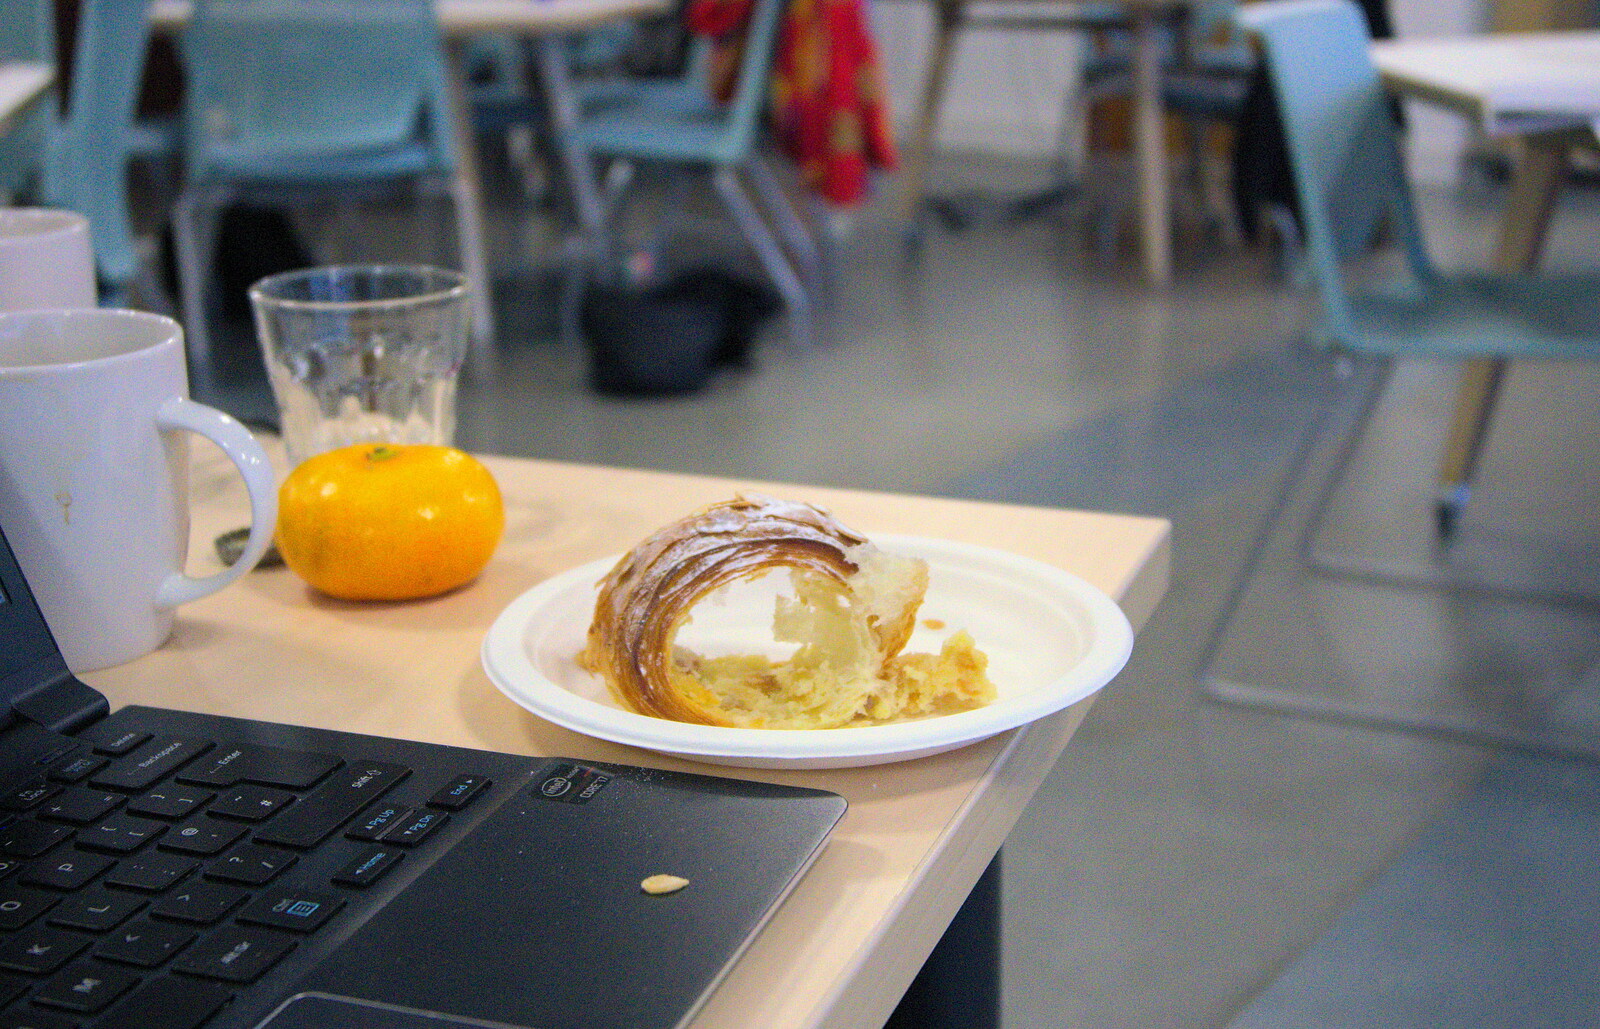 Doug eats a hole through his breakfast pastry from A SwiftKey Hack Day, Westminster, London - 31st May 2013